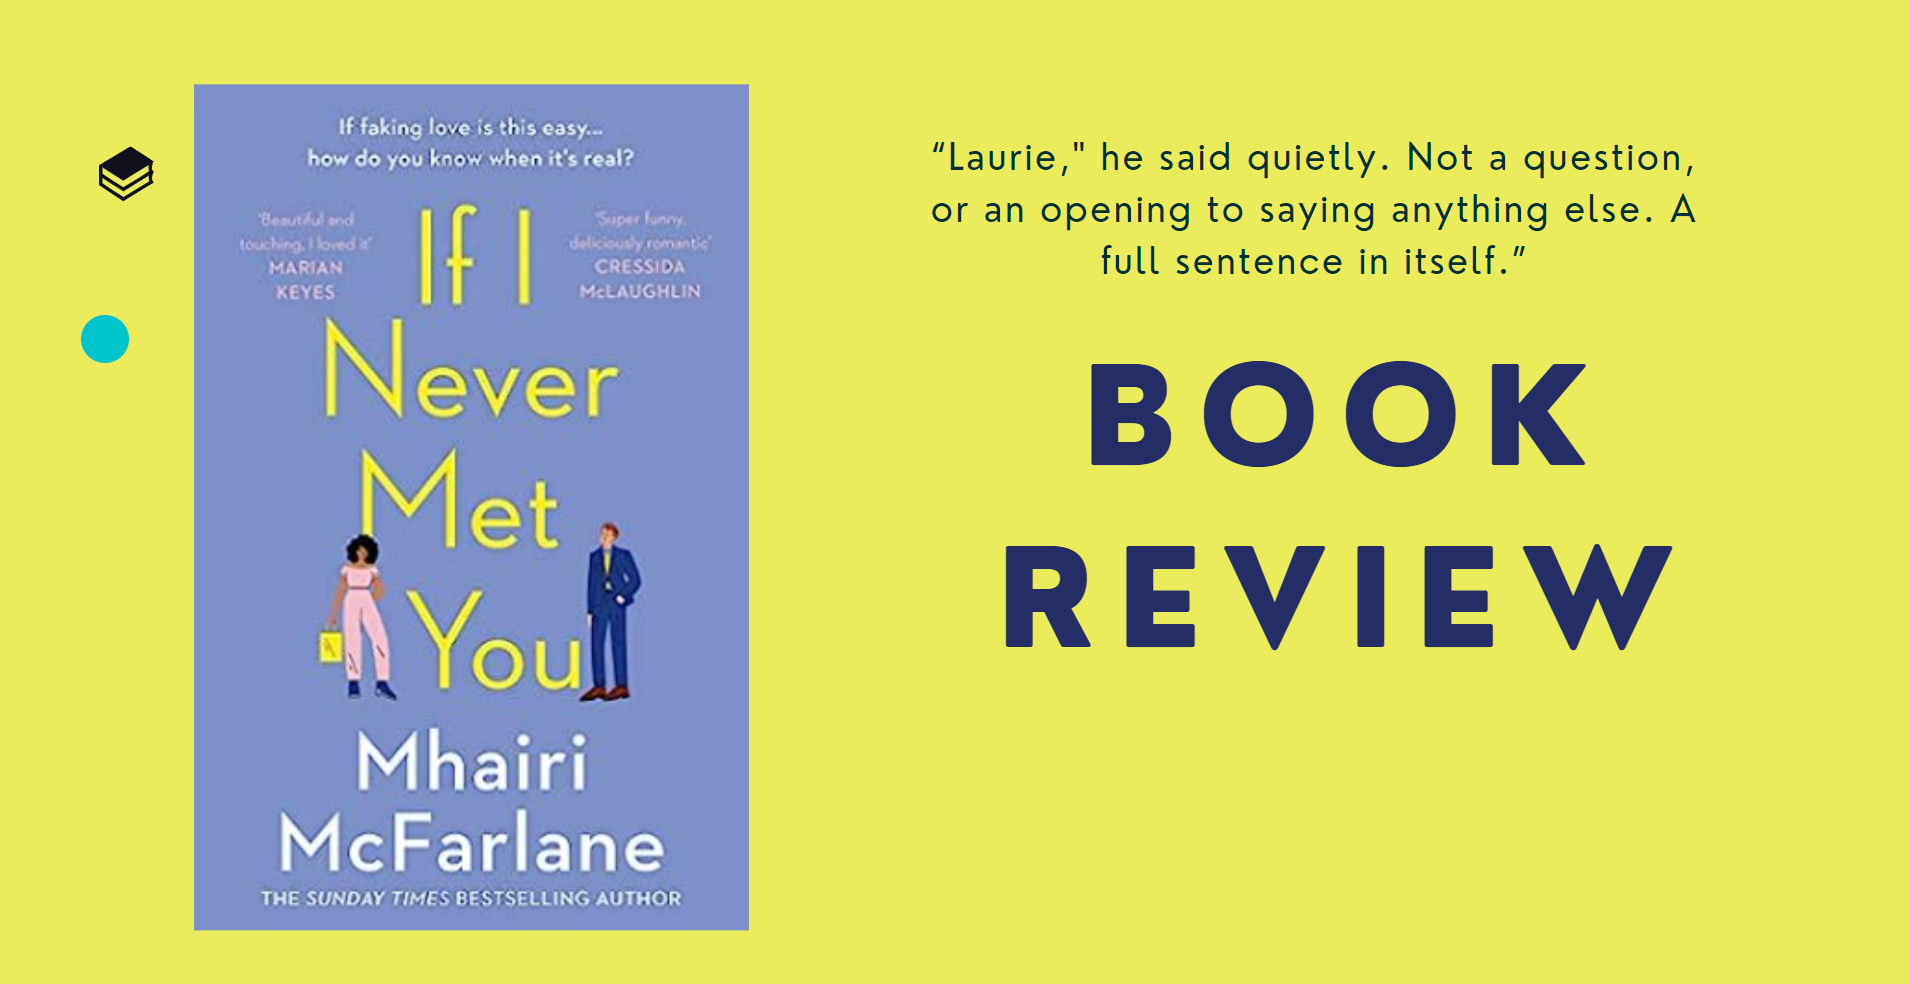 If I Never Met You Book Review